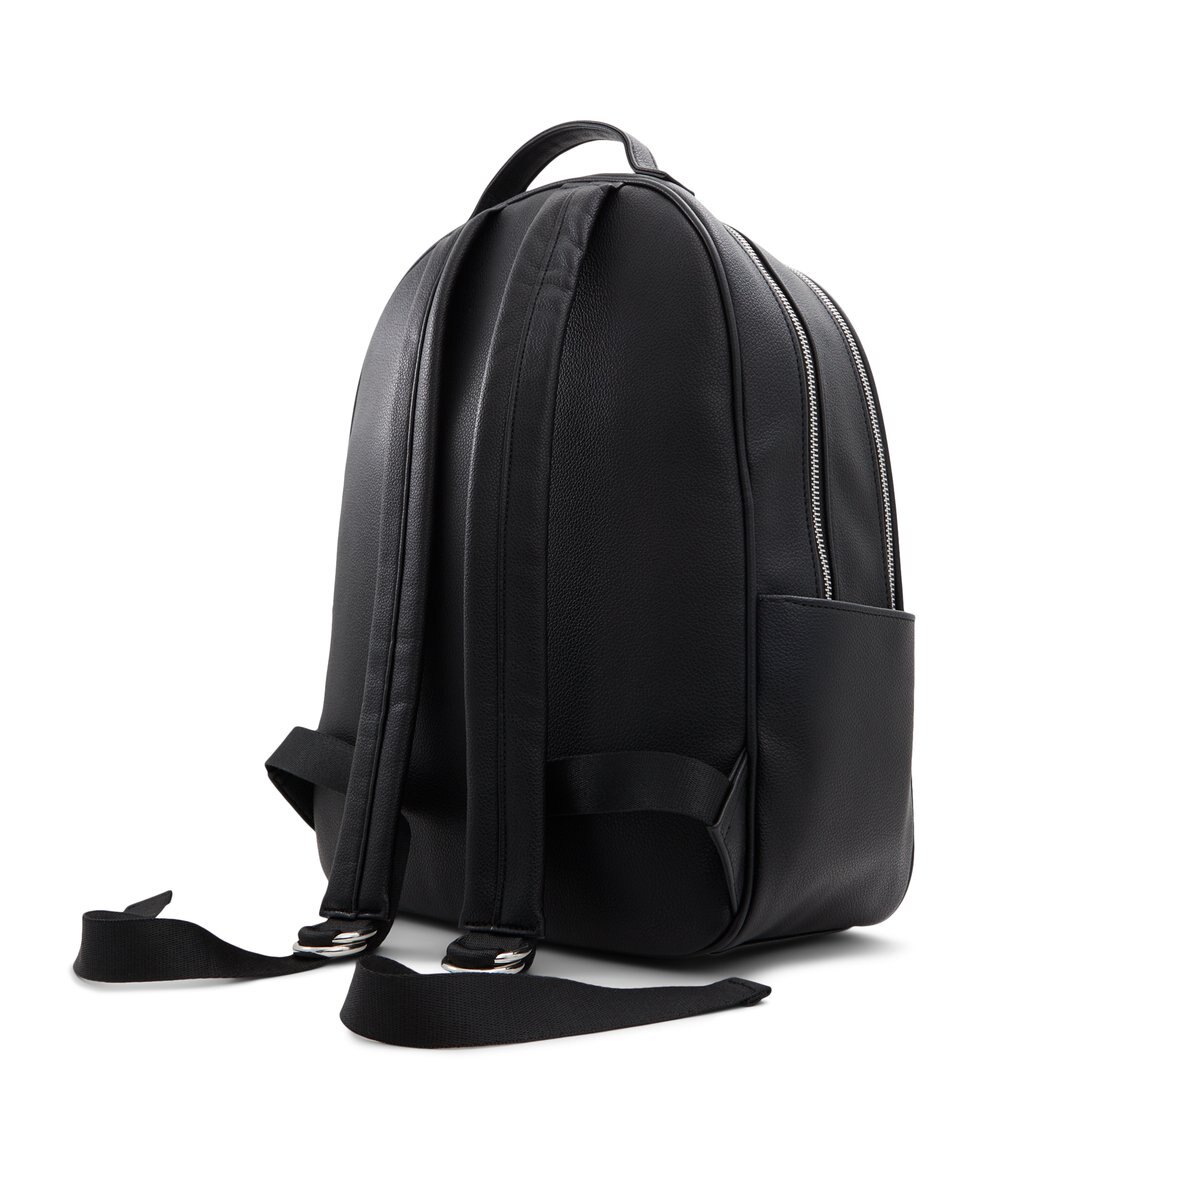 Call It Spring Purse Backpacks